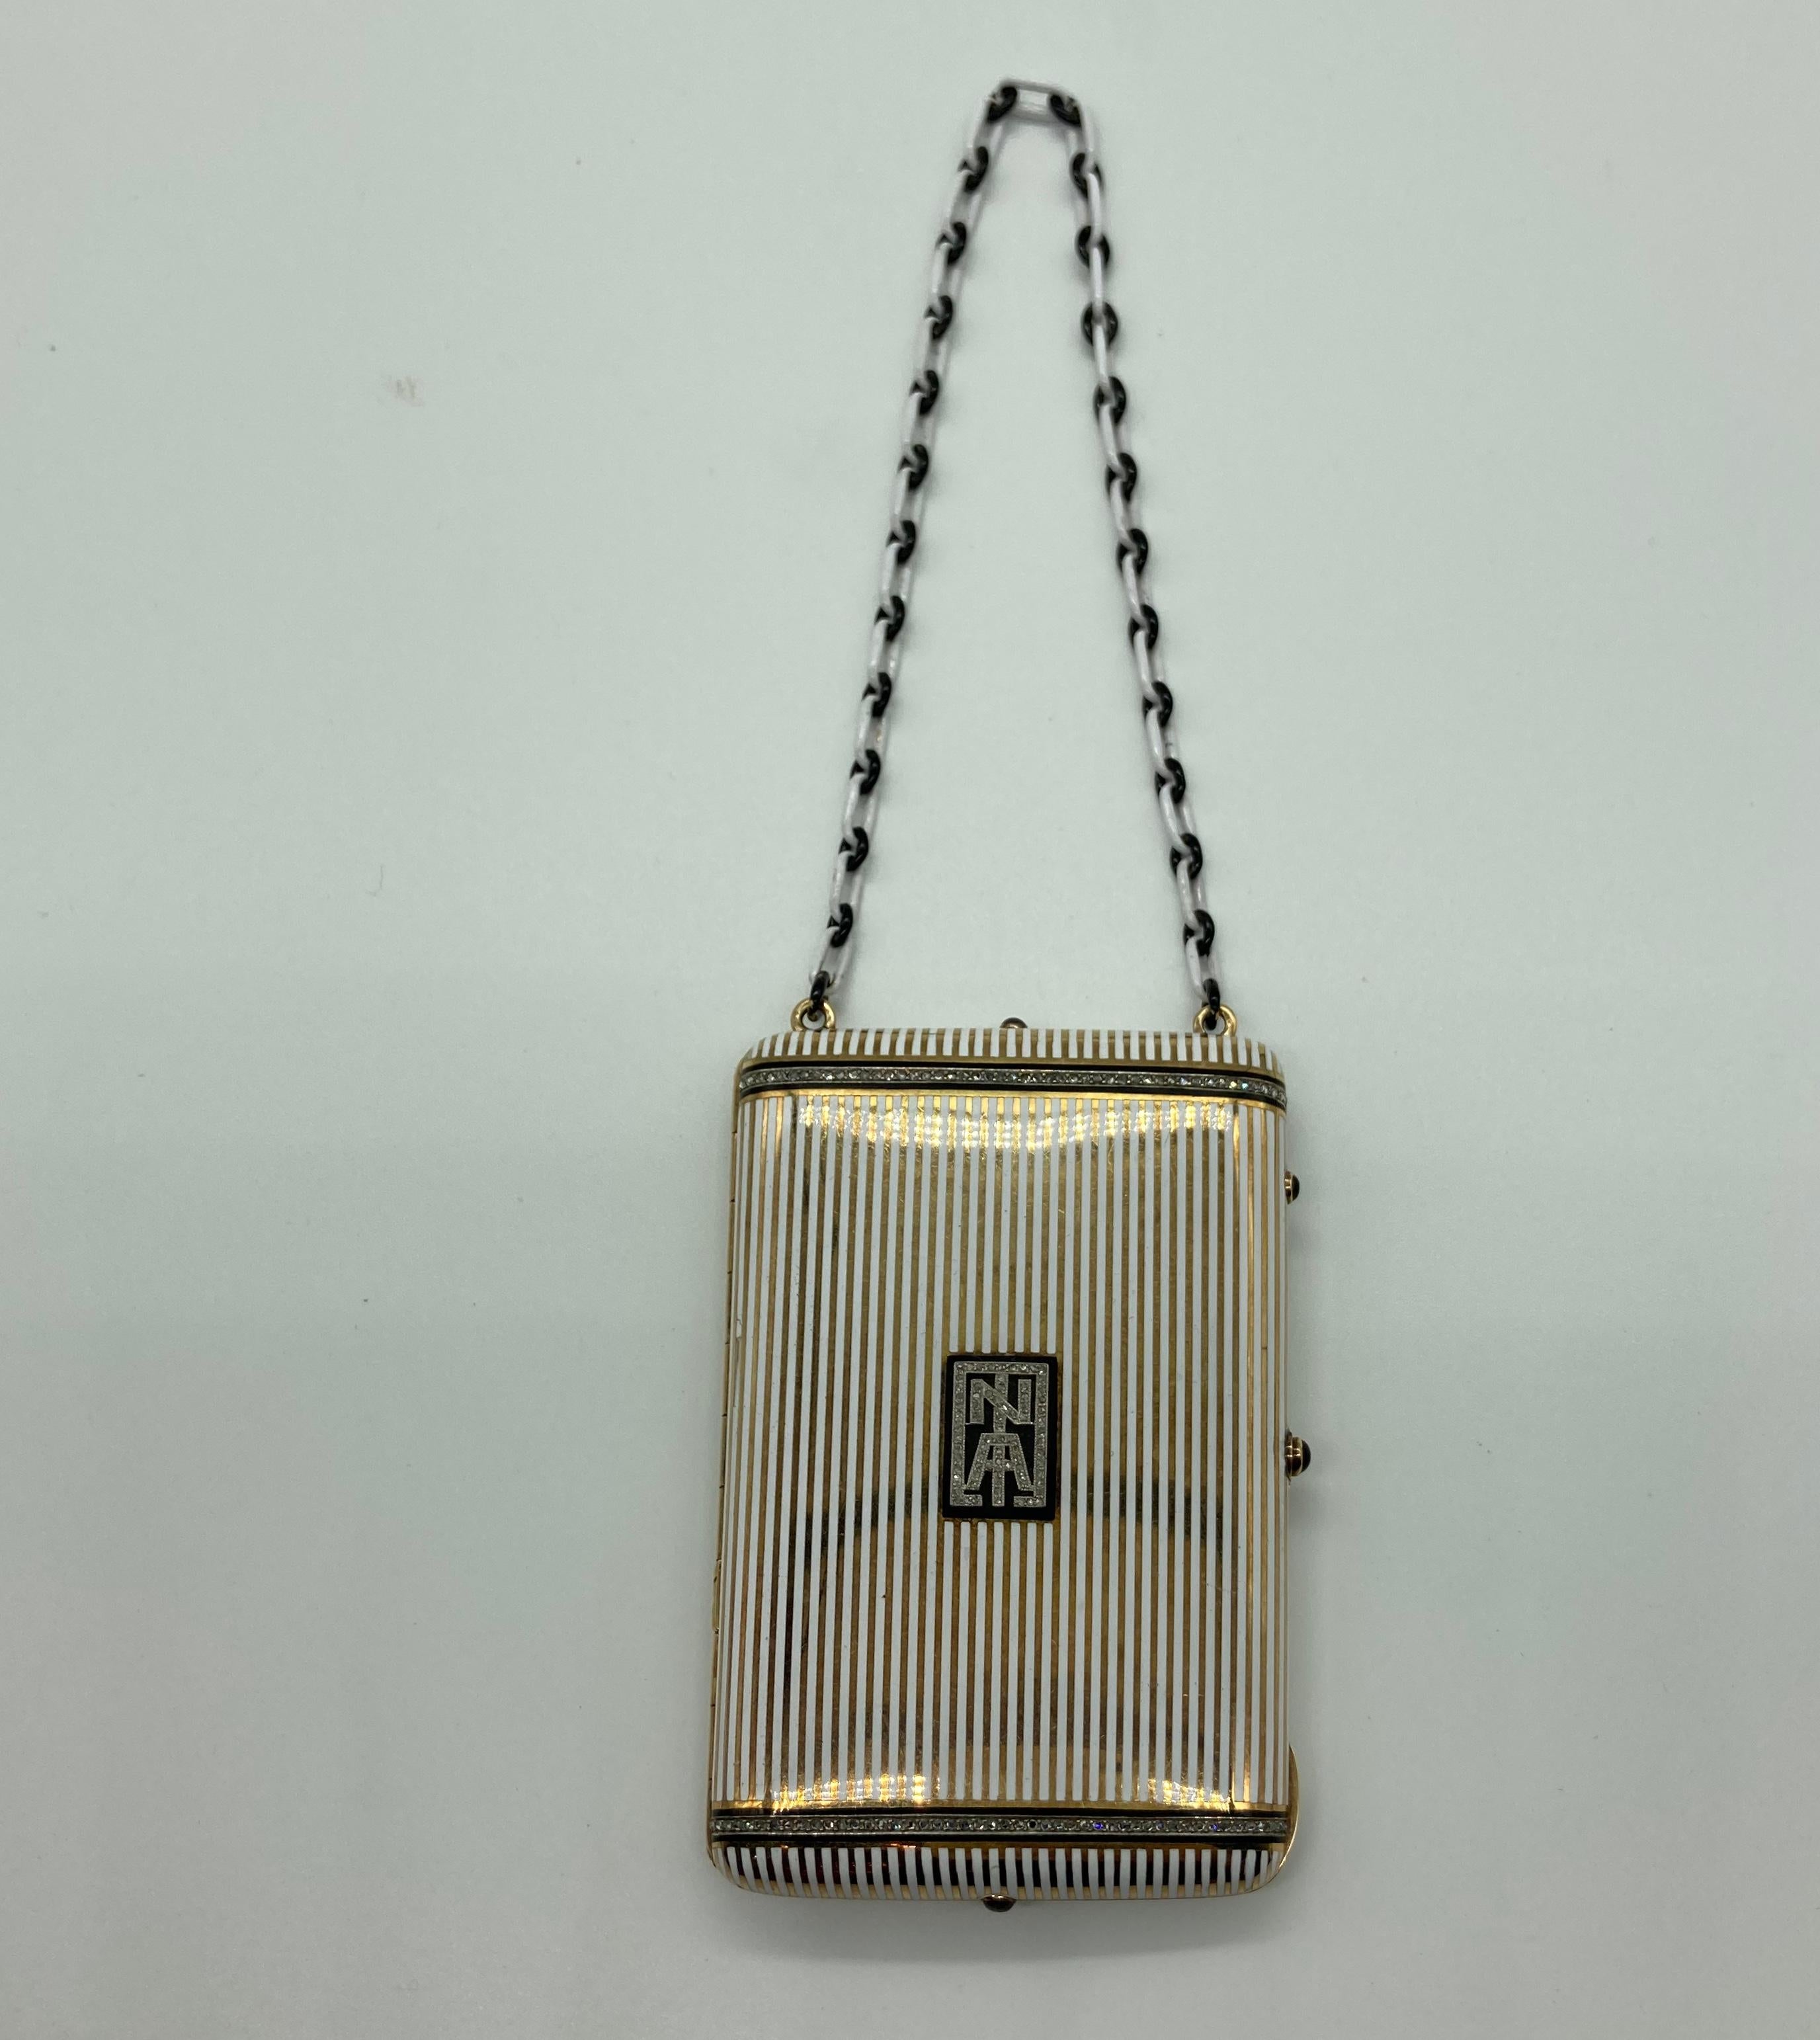 An impressive Art Deco cigarette case with enamel and diamonds, suspended from an enameled chain. Circa 1920s.